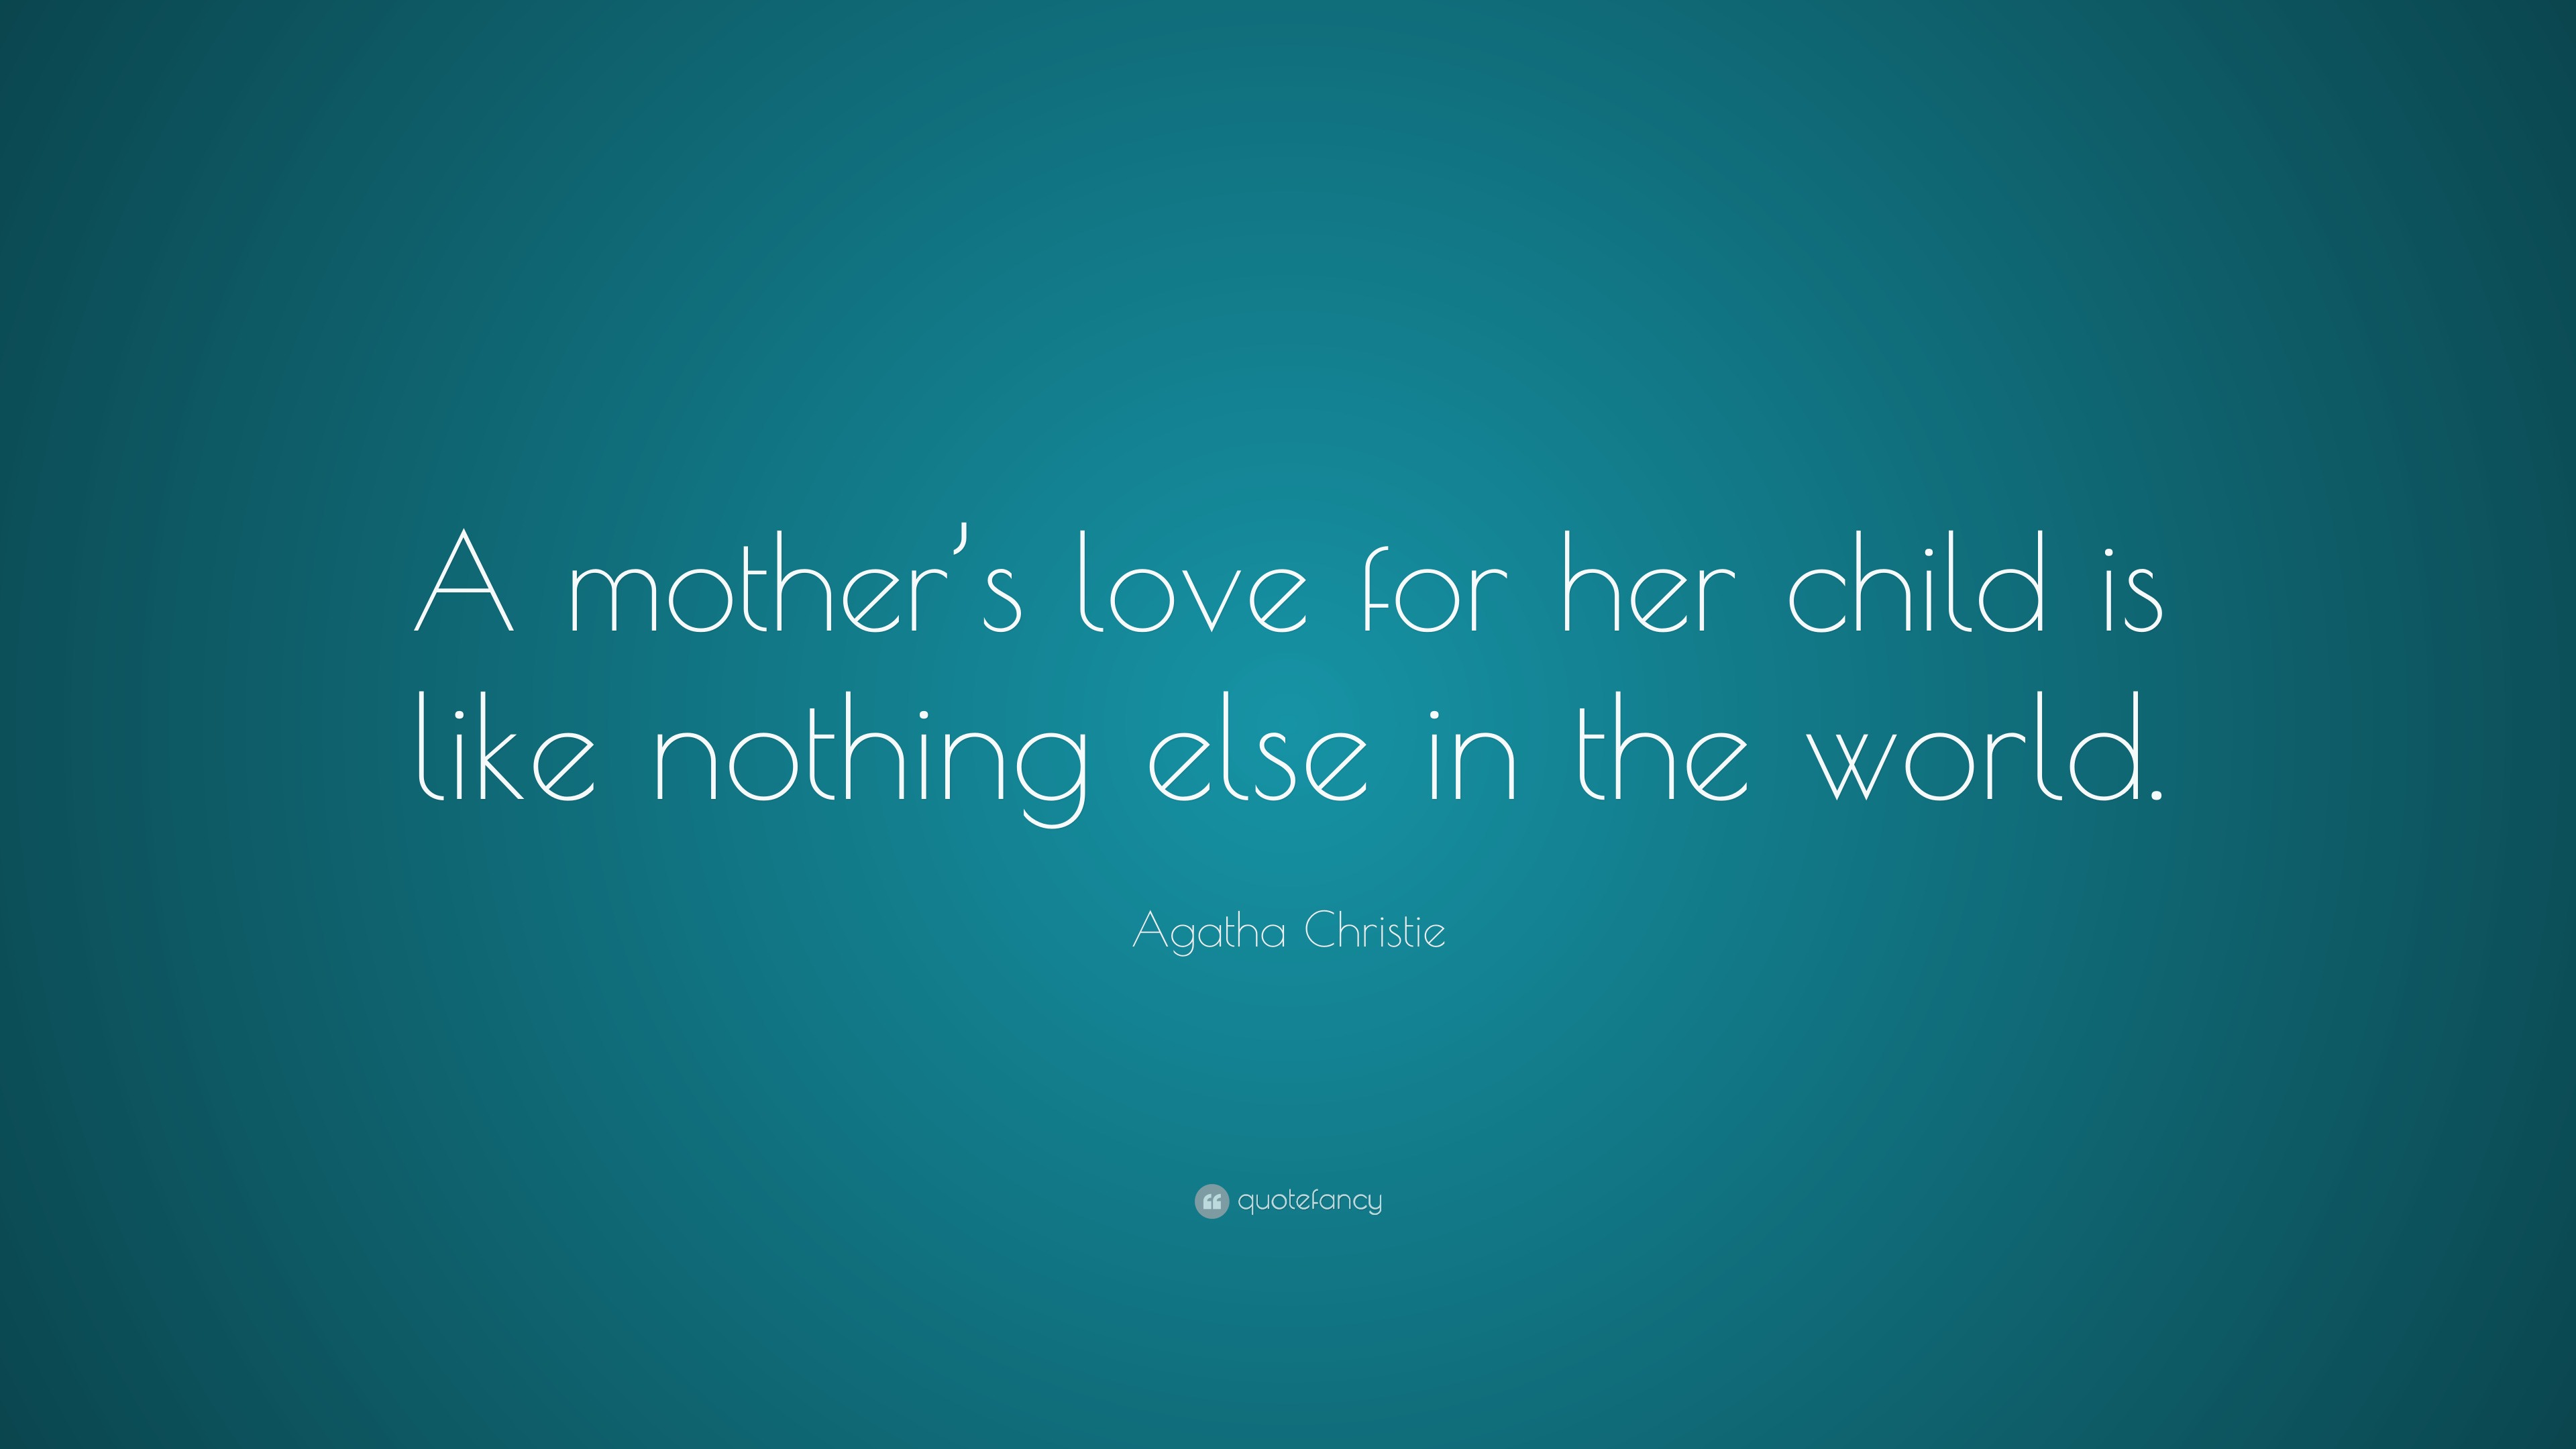 Agatha Christie Quote: “A mother’s love for her child is like nothing ...